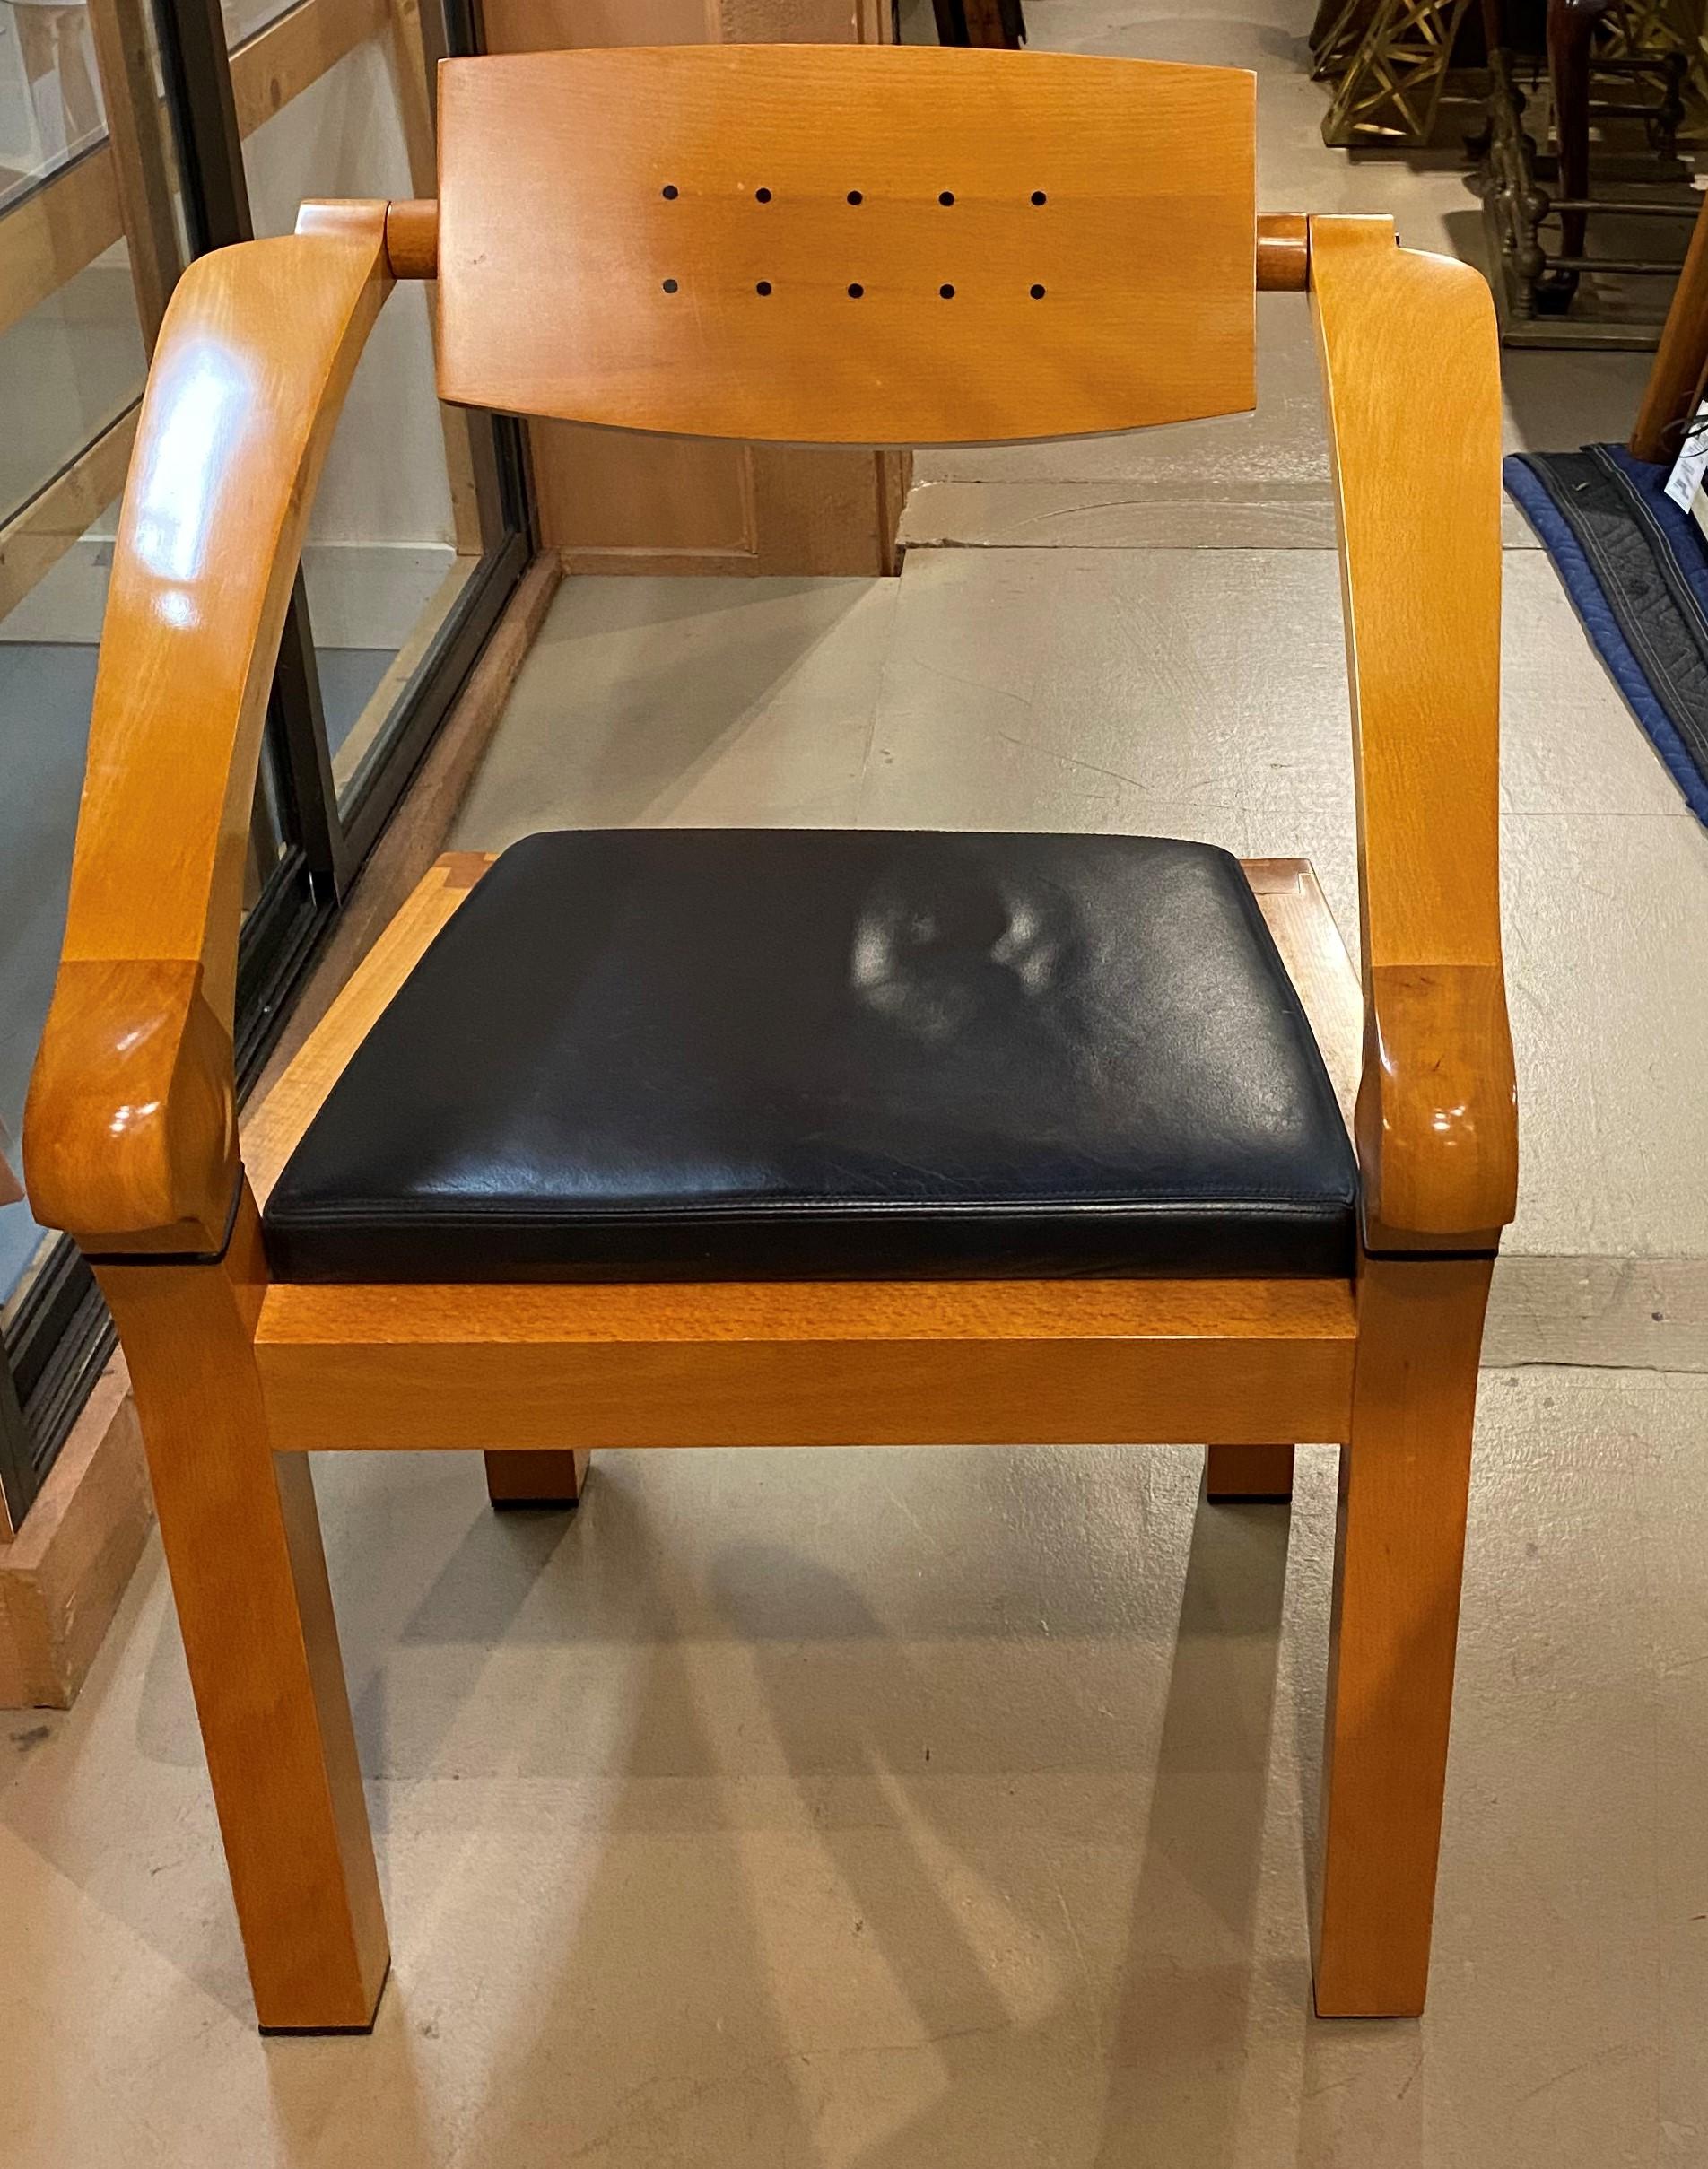 A sleek design spring office chair in polished beech and ebony with leather seat and adjustable back designed by Massimo Scholari for Giorgetti, circa 1990’s. The designer name appears on the Giorgetti brass tag on the underside of the chair, and